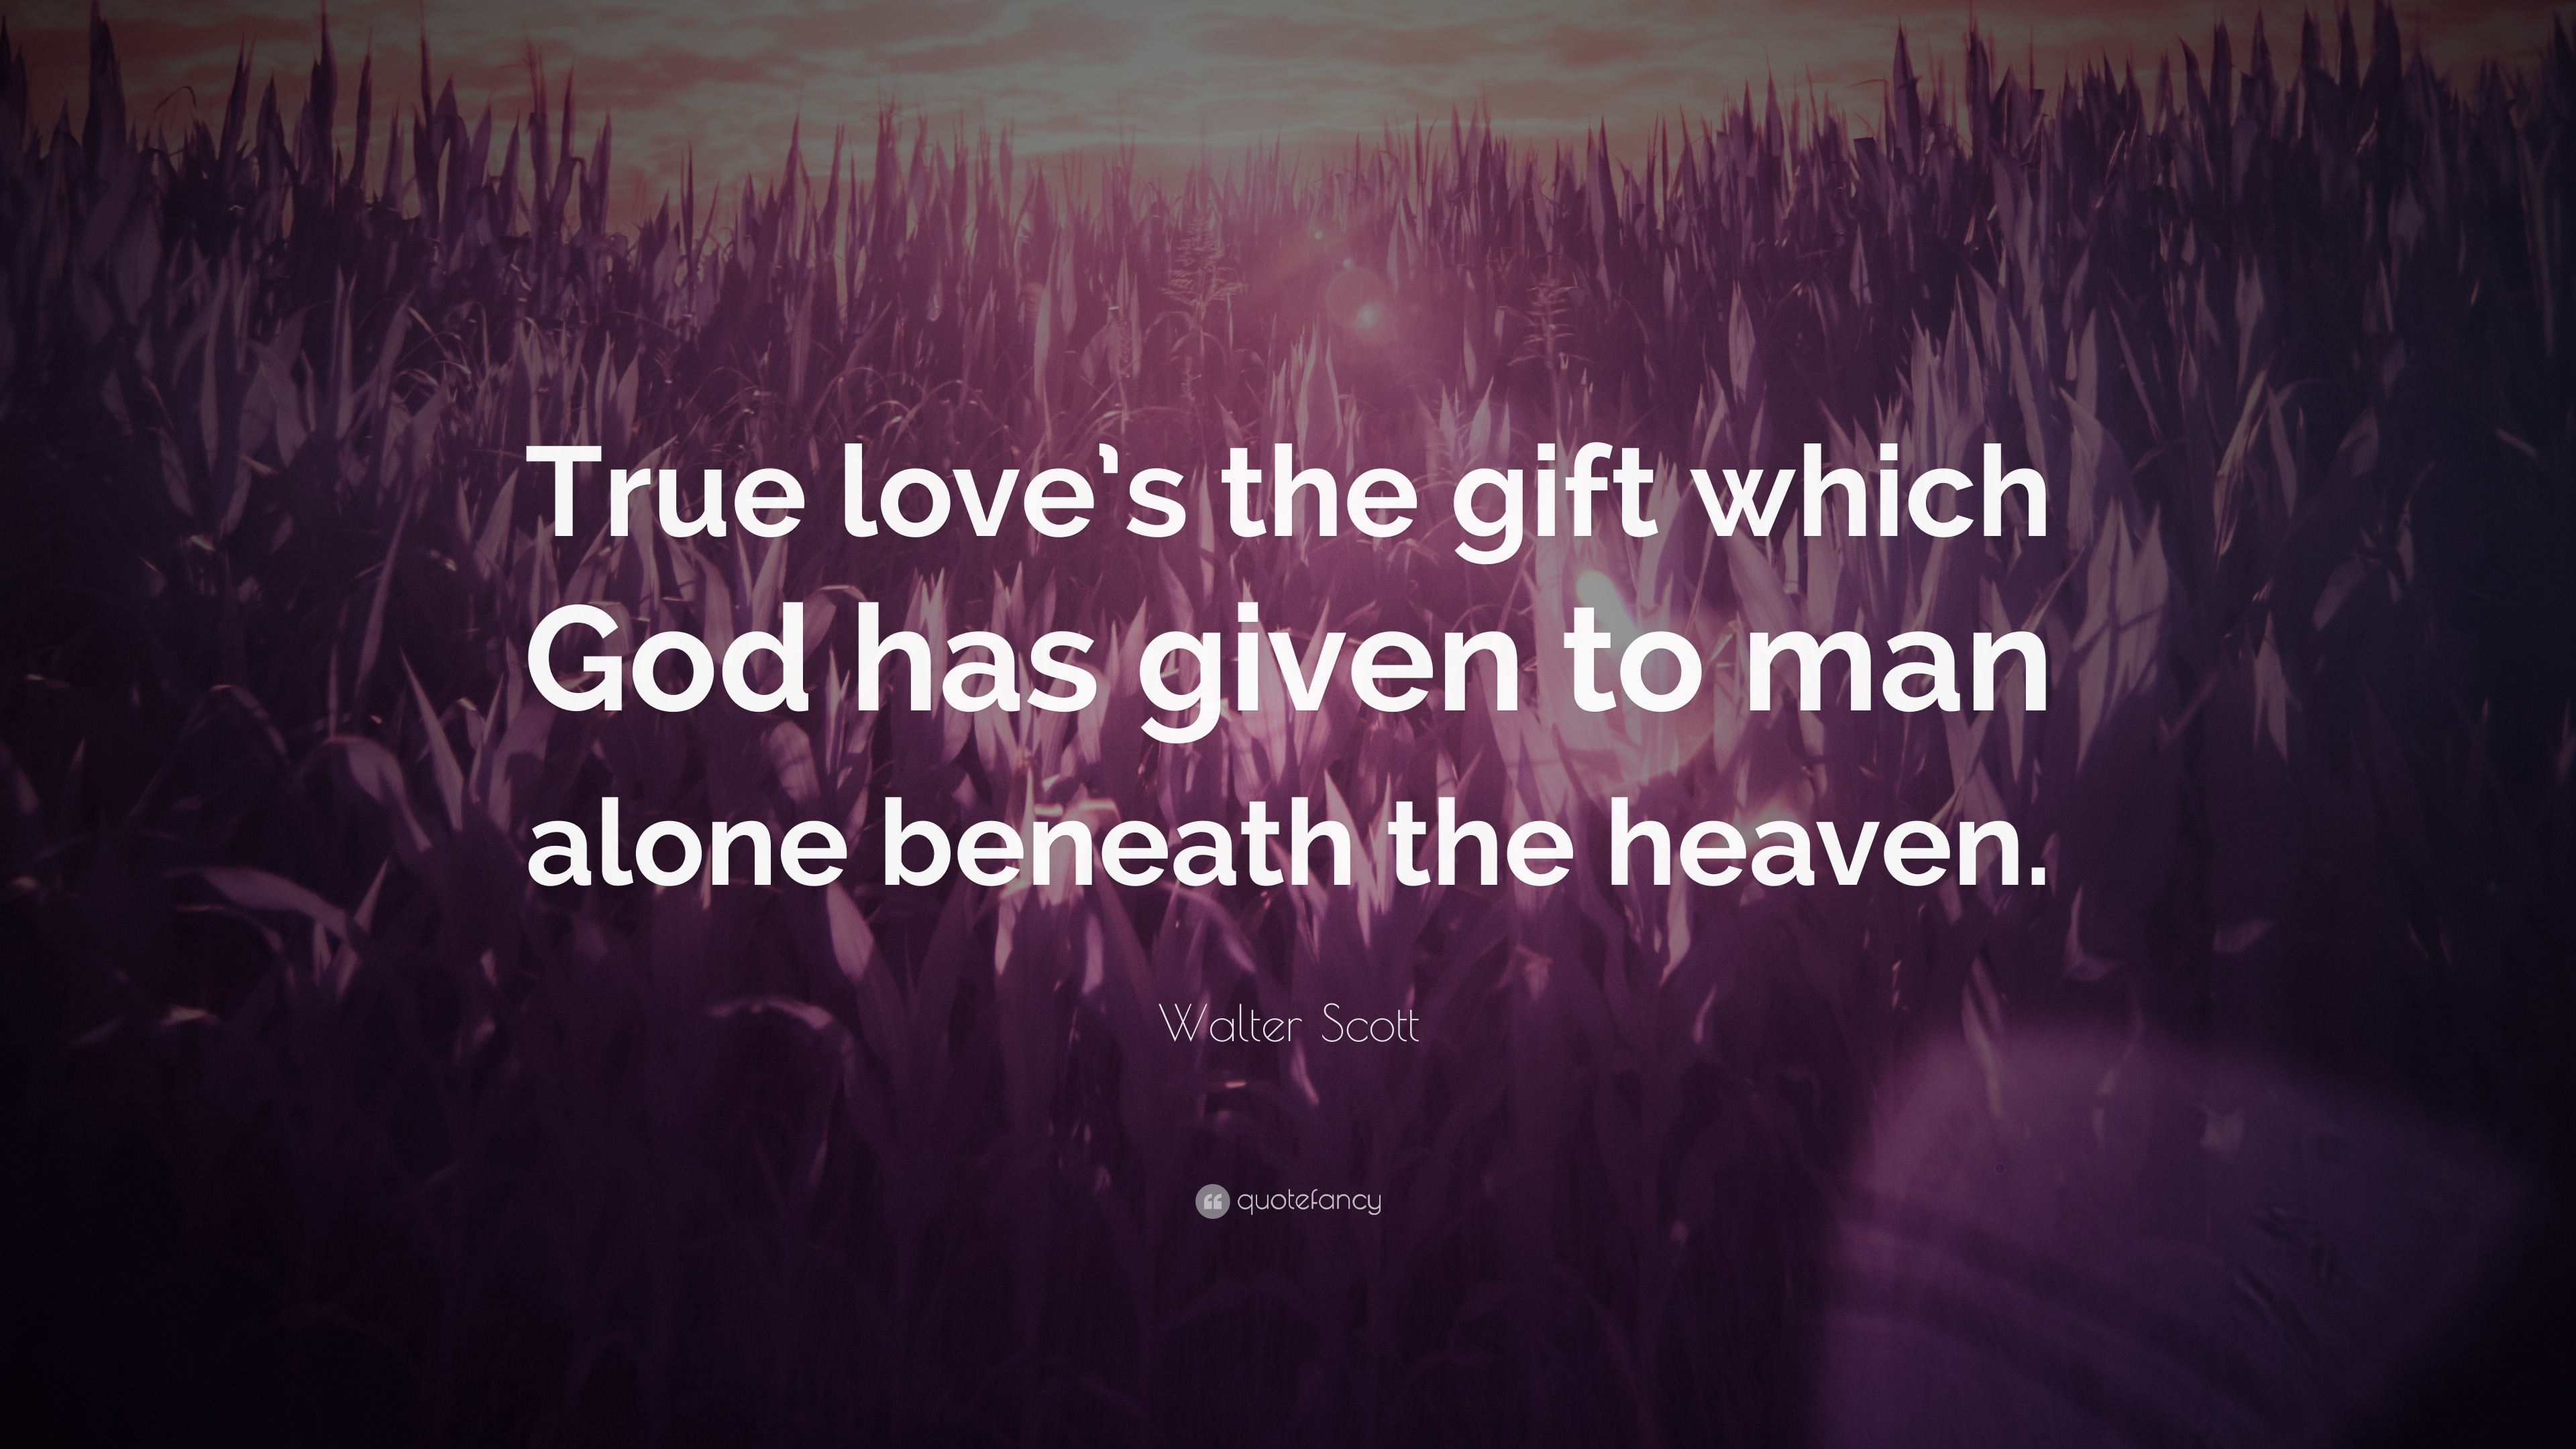 Walter Scott Quote “True love s the t which God has given to man alone